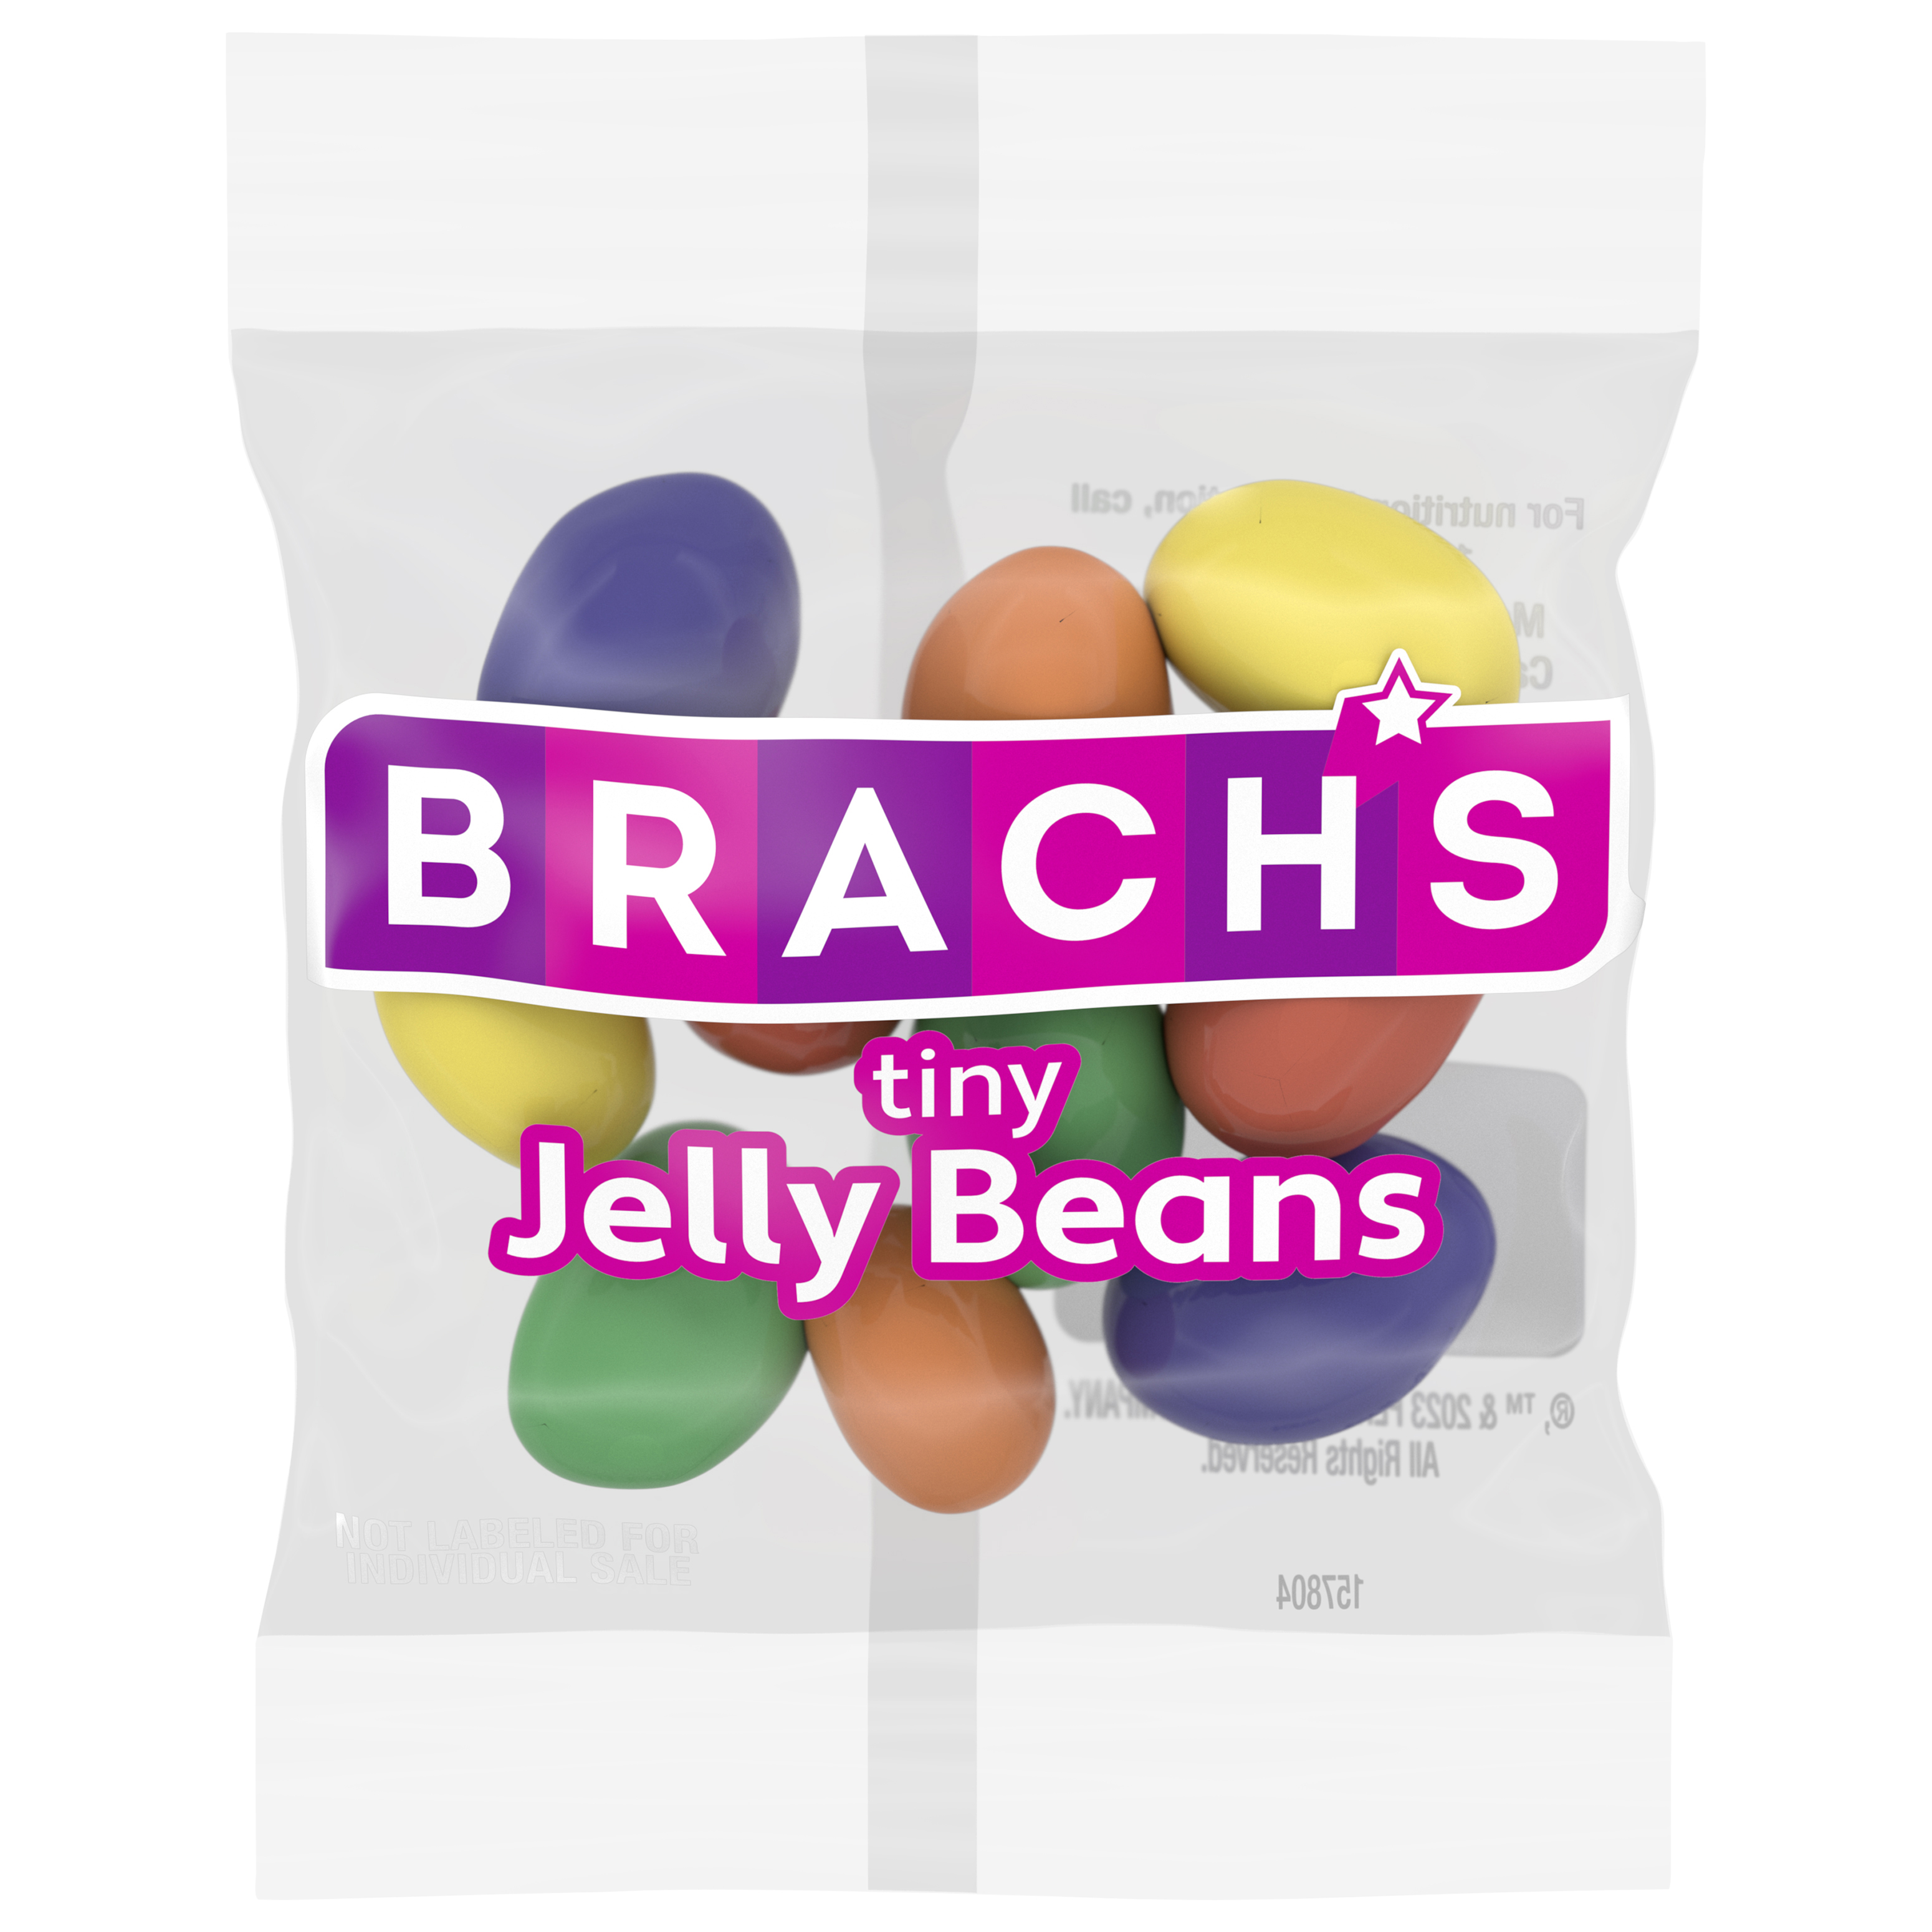 Brach's Tiny Jelly Beans Easter Egg Filler, 9oz, 18 Count - image 3 of 5